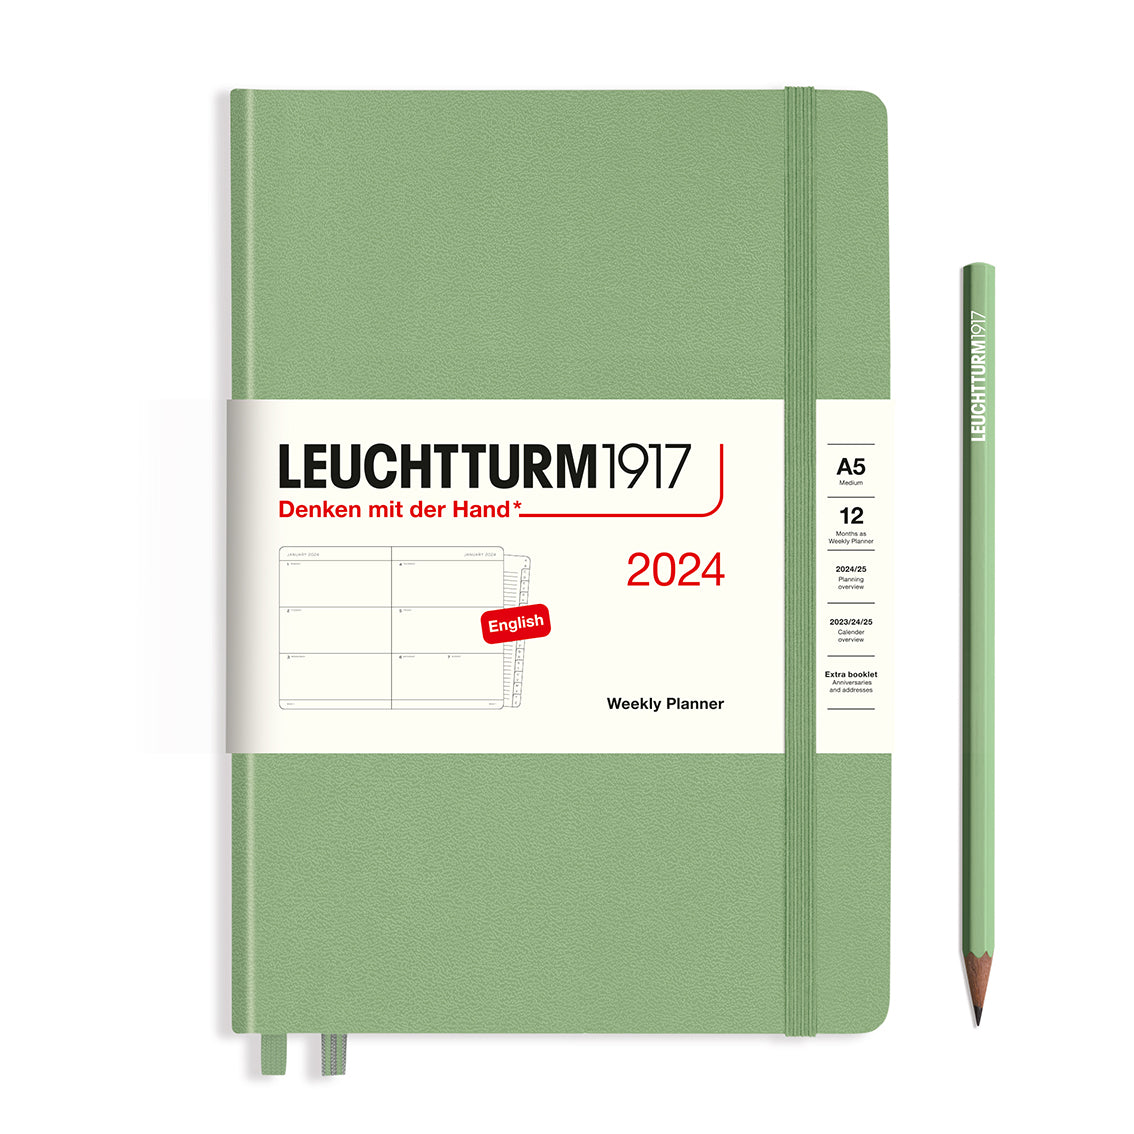 An image of a sage green planner with a sage green elastic band holding it together and a cream paper wrap around the middle stating the business name Leuchtturm1917, that it is for the year 2024, it is a weekly planner, is A5 in size and an English language version. It has an image on the wrap showing the inside layout which is a week spread across 2 pages. A sage green pencil is shown at the side of the planner.